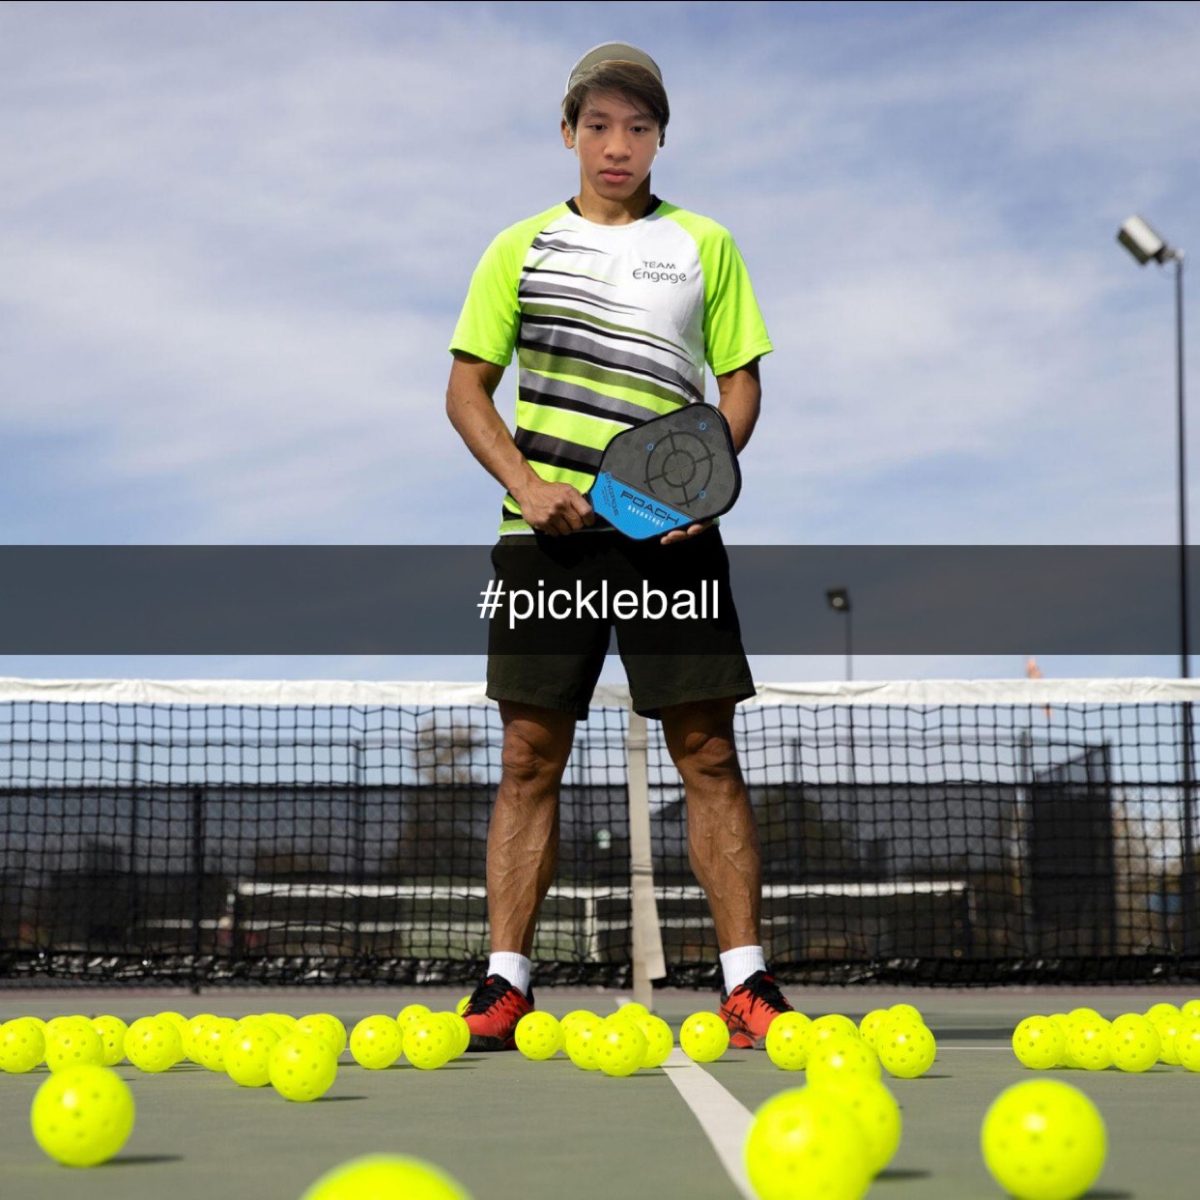 My face on professional pickleball player Tao Thongvanhs face. (Edited by John Nguyen, Photo credits to The Daily Sentinel)